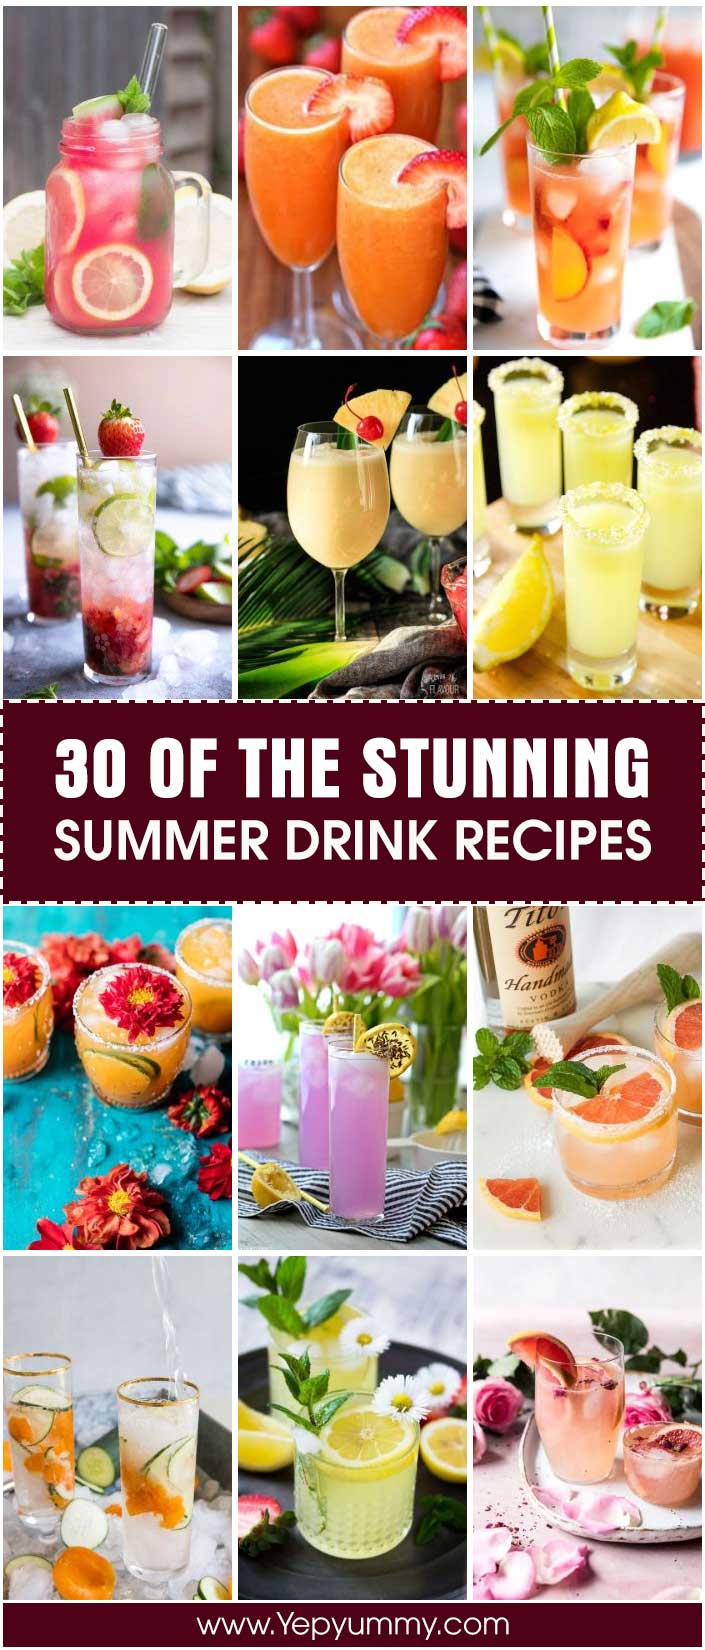 30 Of The Stunning Summer Drink Recipes